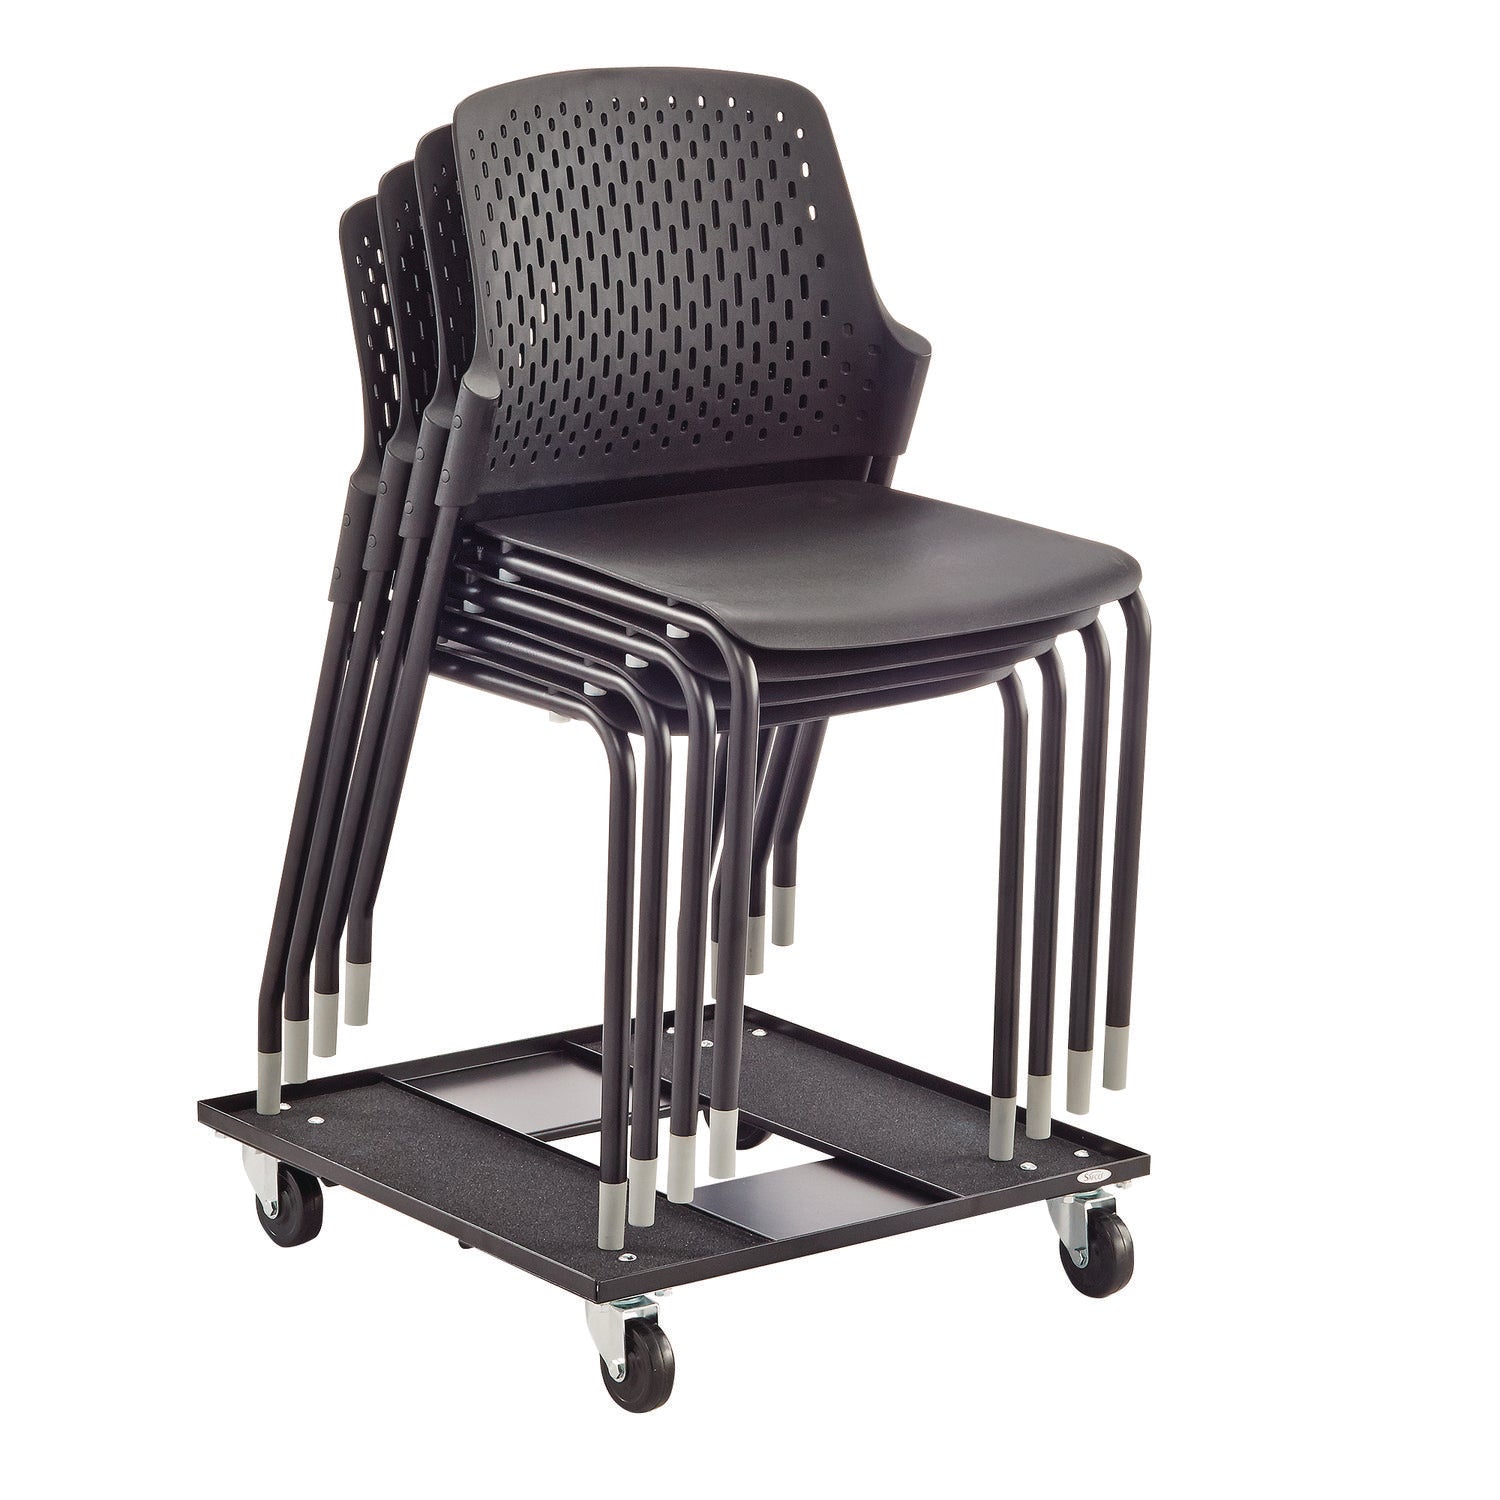 Safco Heavy-duty Stacking Chair Cart - 300 lb Capacity - 3" Caster Size - Steel - x 23.1" Width x 23.1" Depth x 4.5" Height - Black - 1 Each - 2